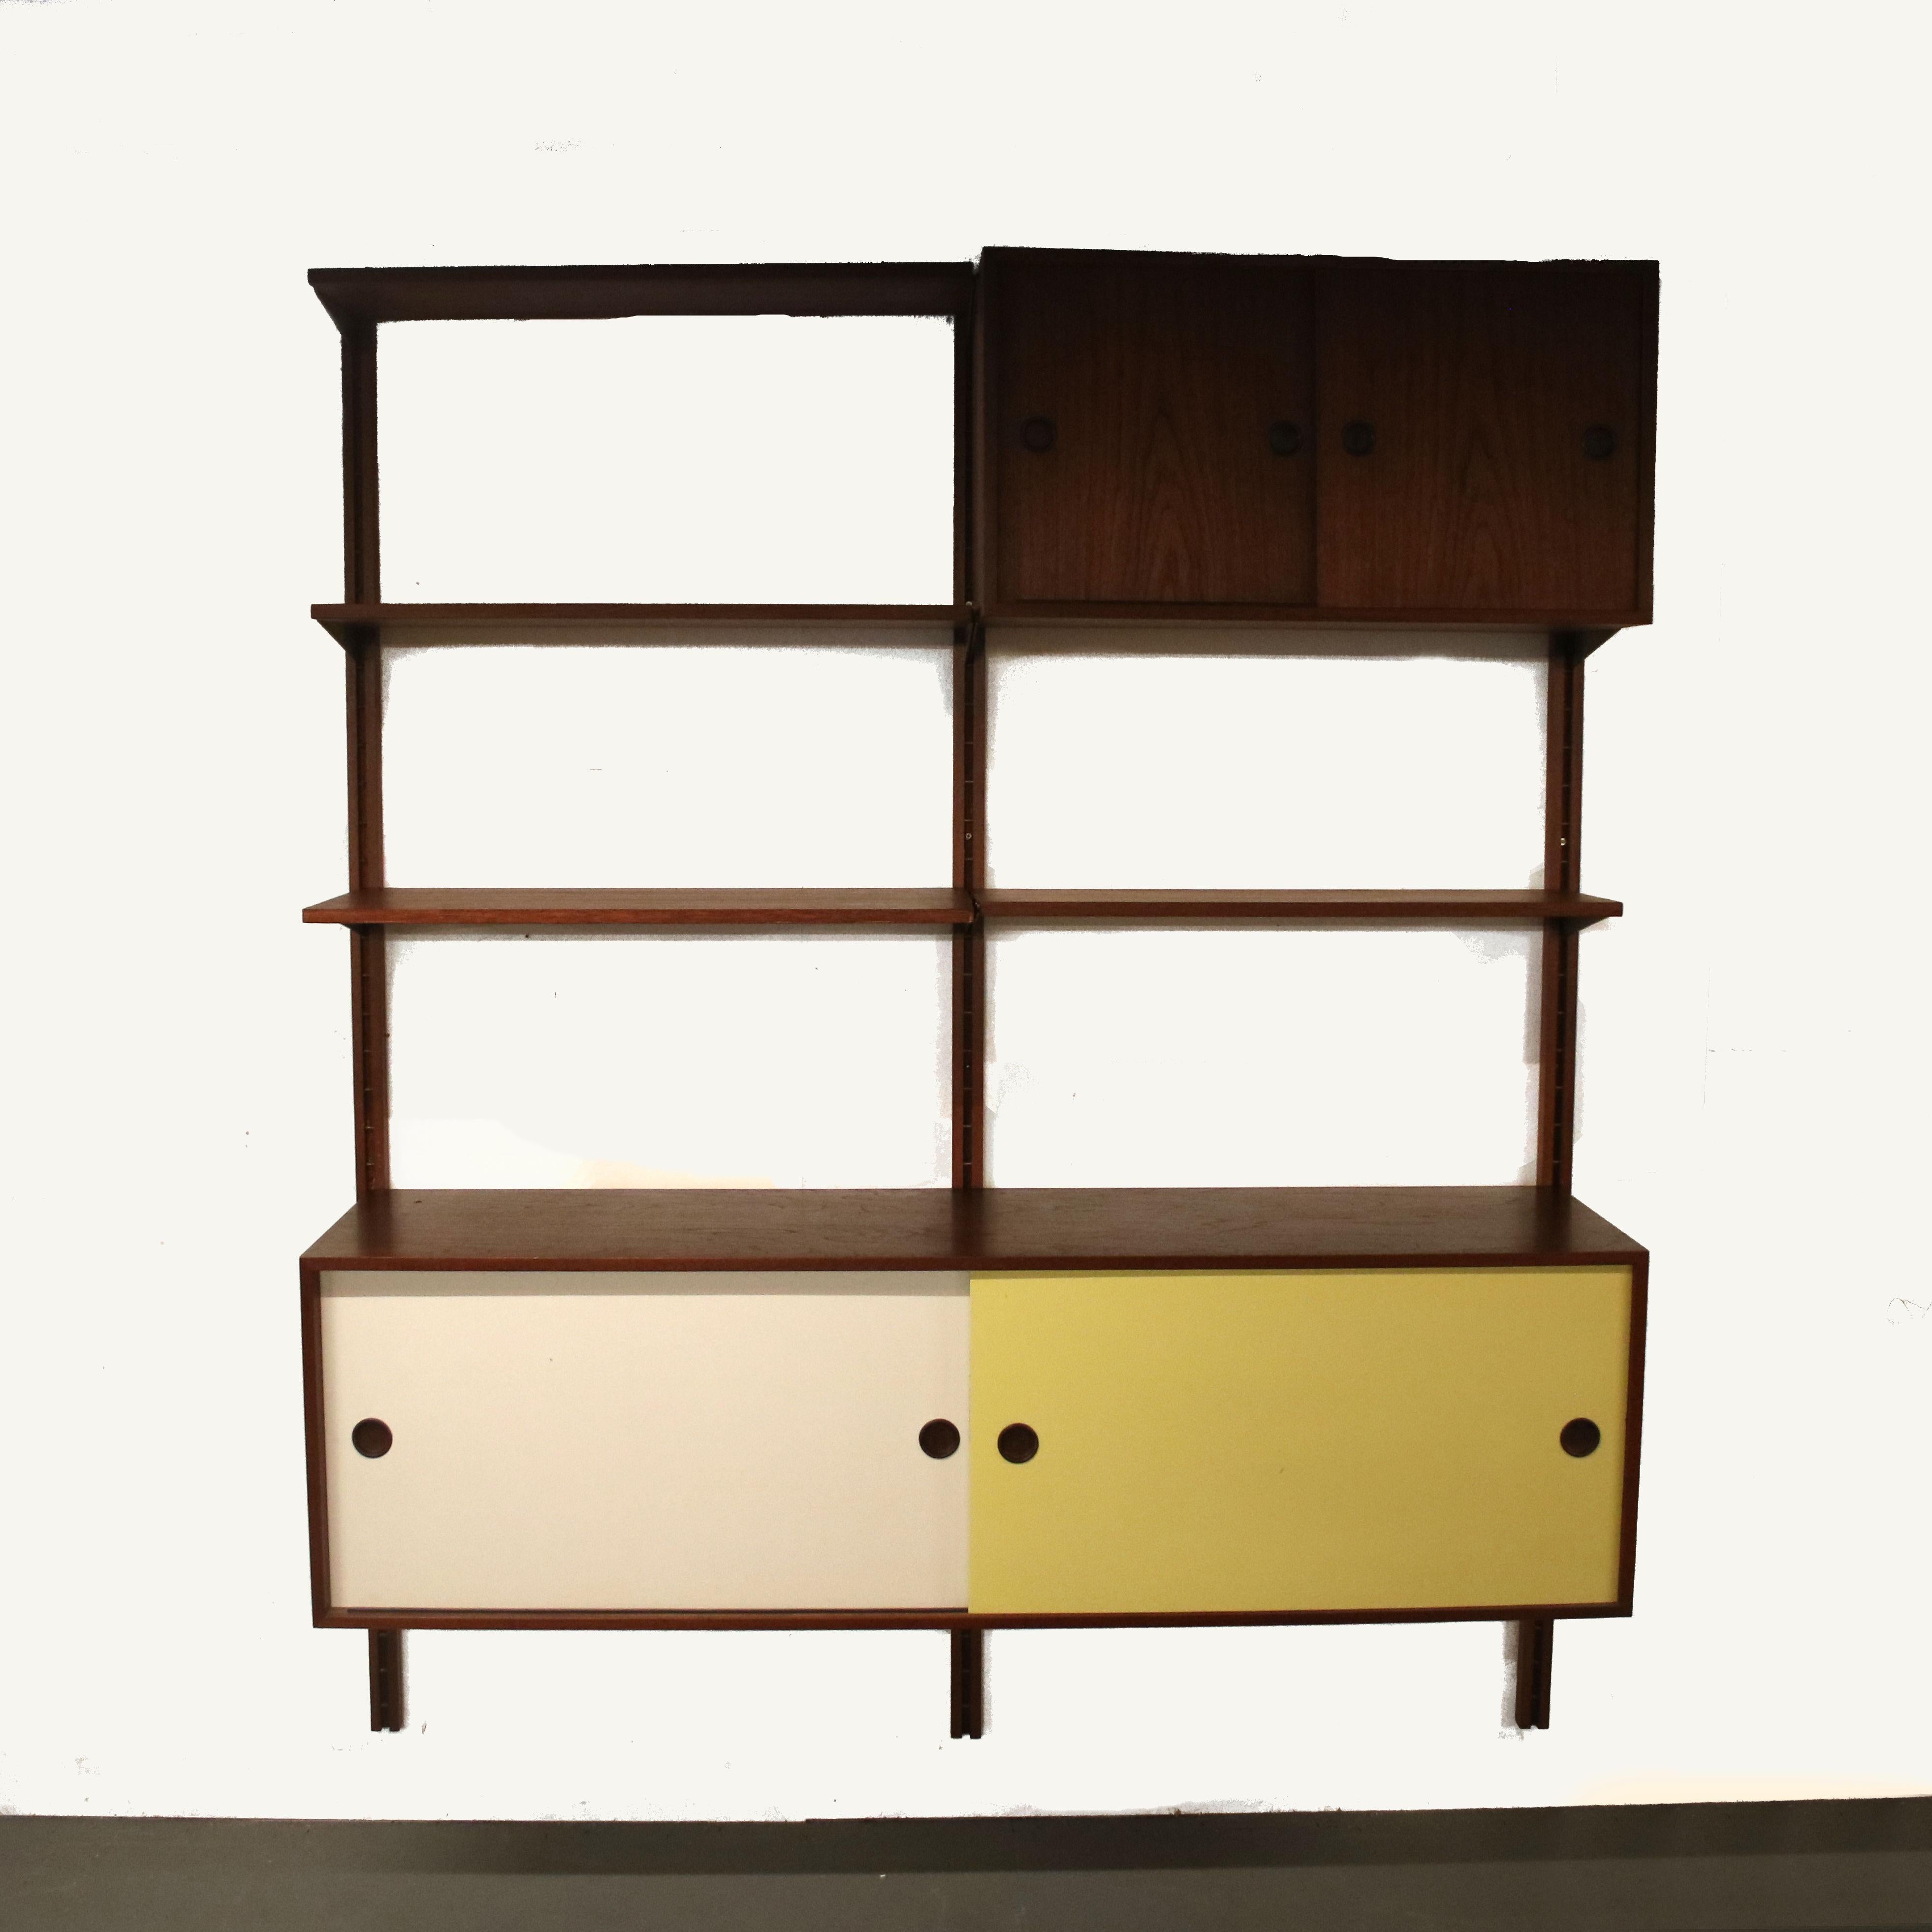 A fantastic wall mounted system cabinet, model “BO71”, designed by Finn Juhl and manufactured by Bovirke in Denmark around 1960.

This beautiful piece made of teak wood in a warm brown colour with white and brown laminated sliding doors. It is two